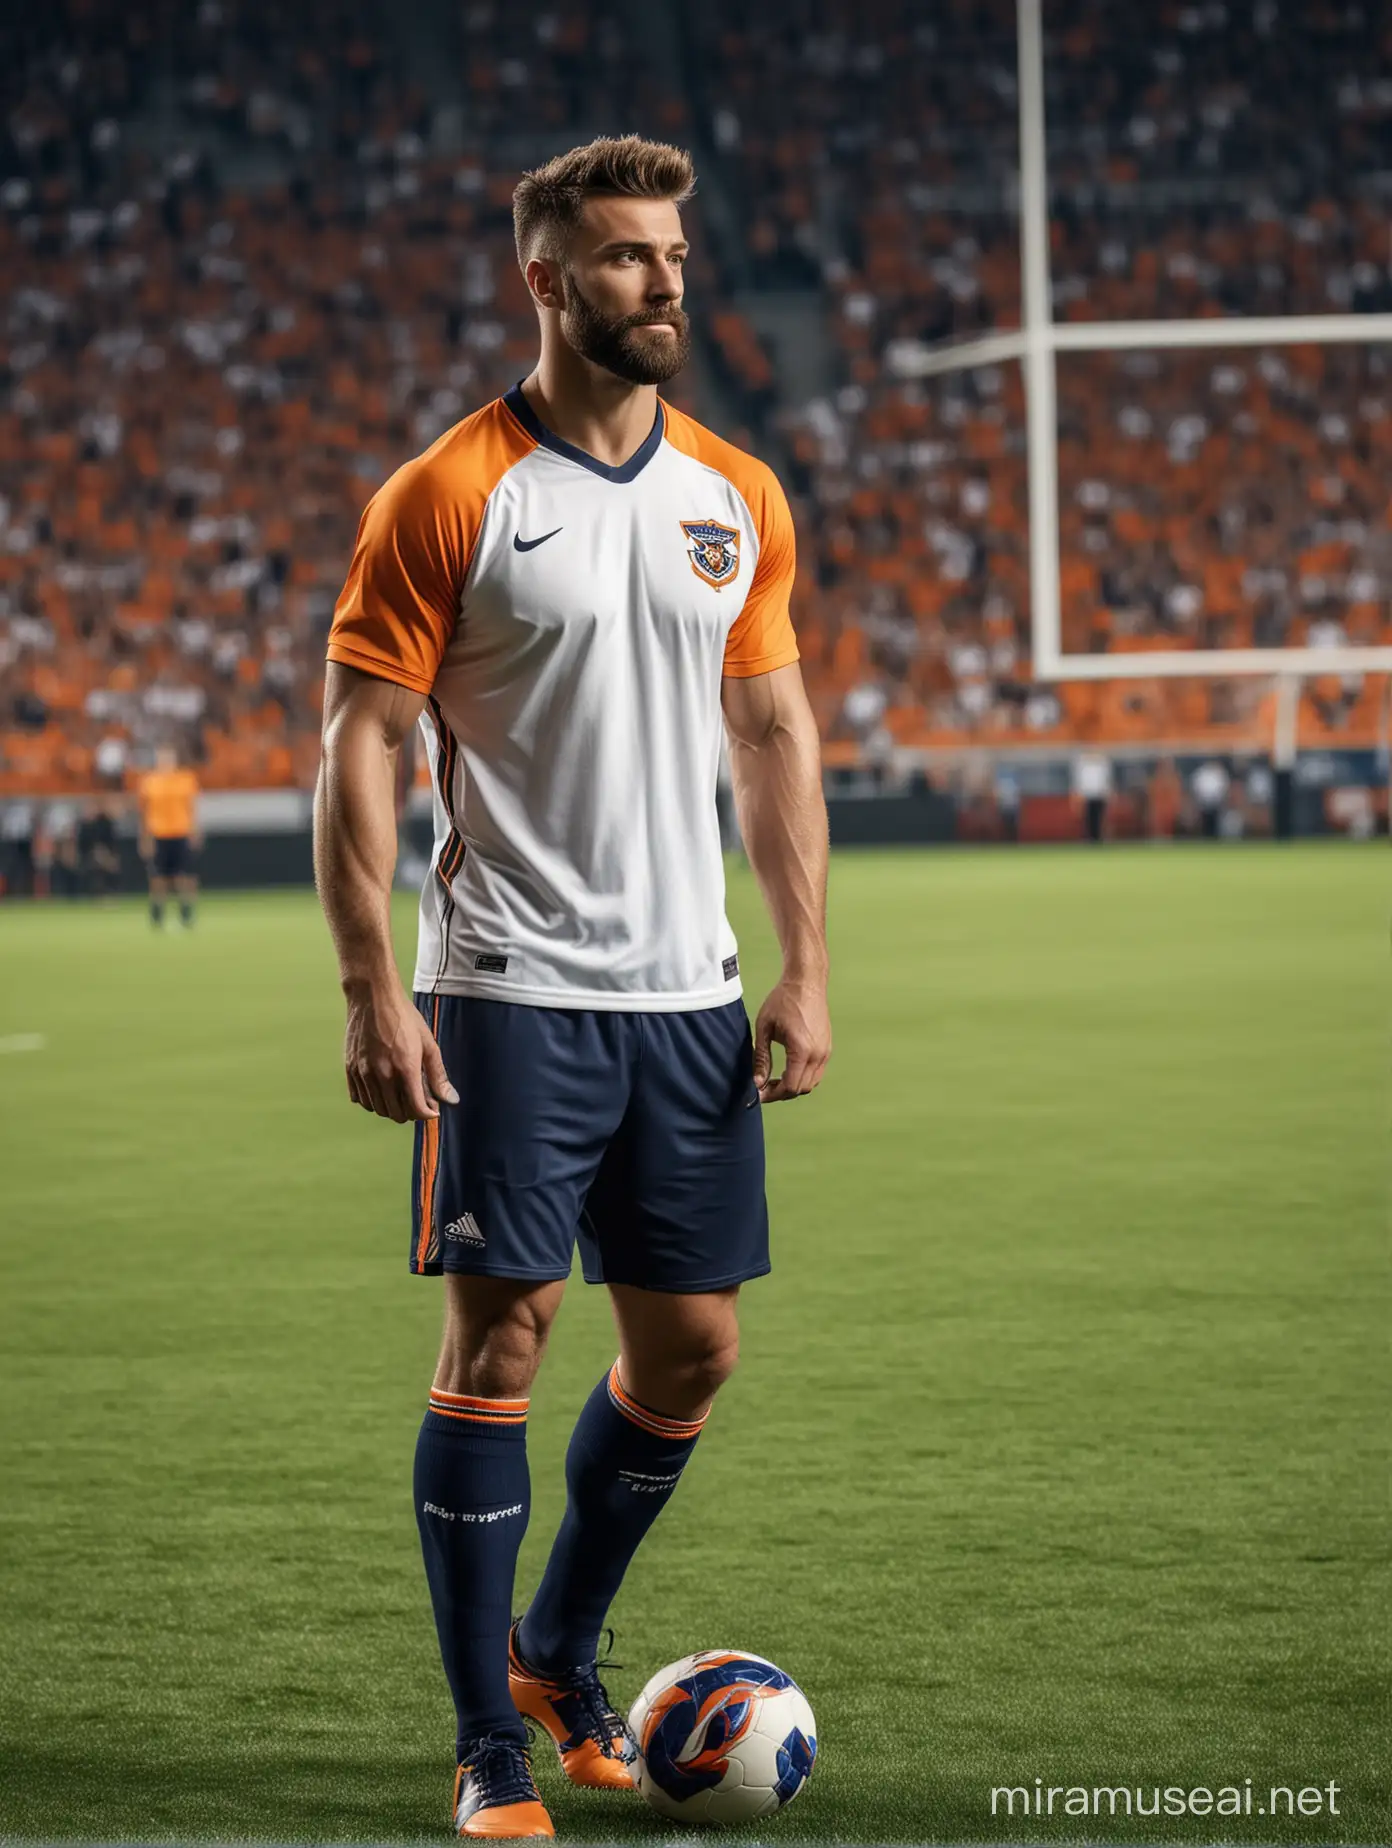 Tall and handsome muscular men with beautiful hairstyle and beard with attractive eyes and Big wide shoulder and chest as football player in navy, orange and white jersey playing football on field 